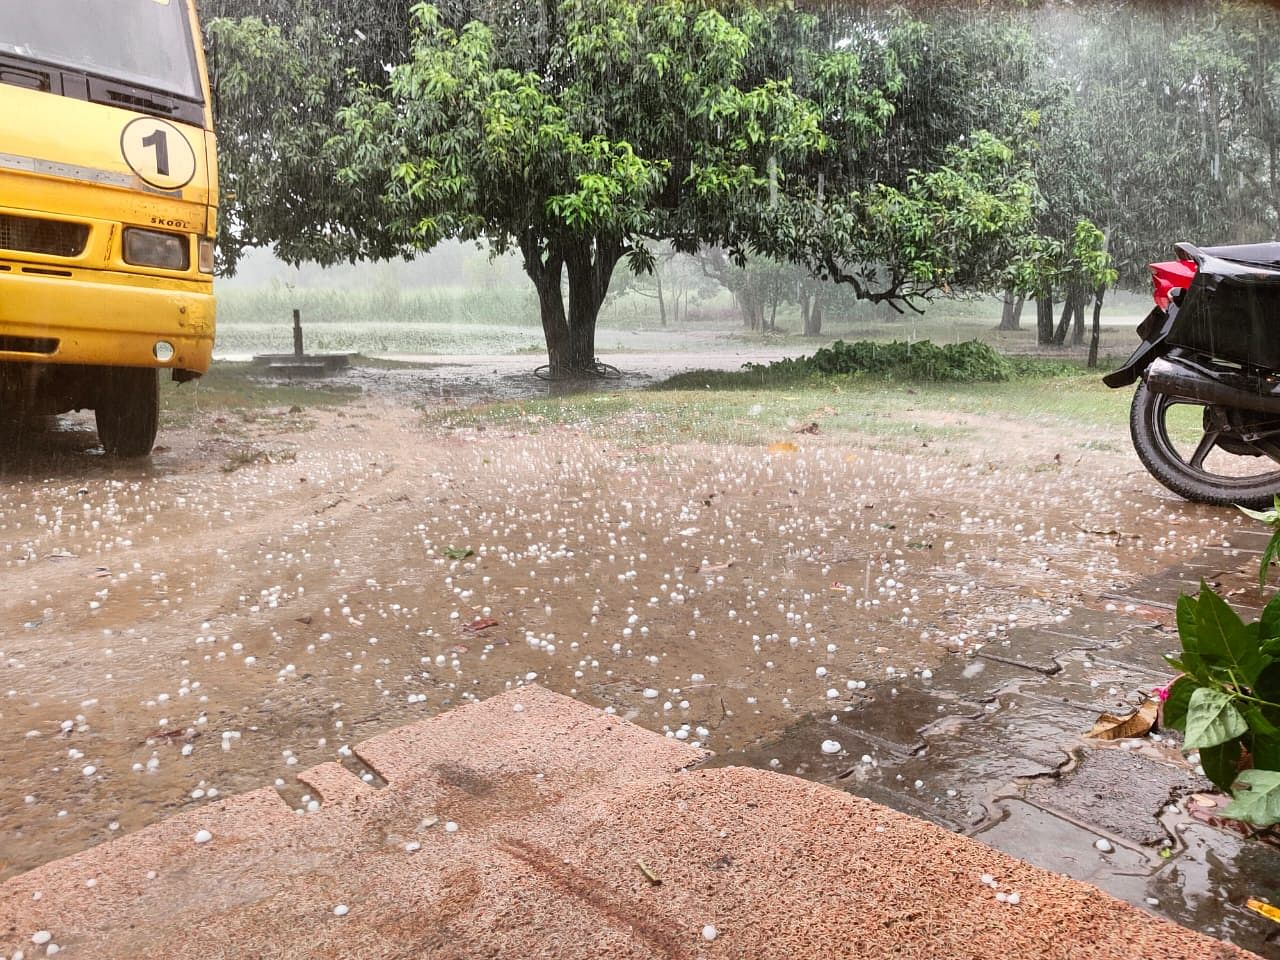 Thunderstorm and hailstorm in the entire up, Meteorological Department predicted for the coming days